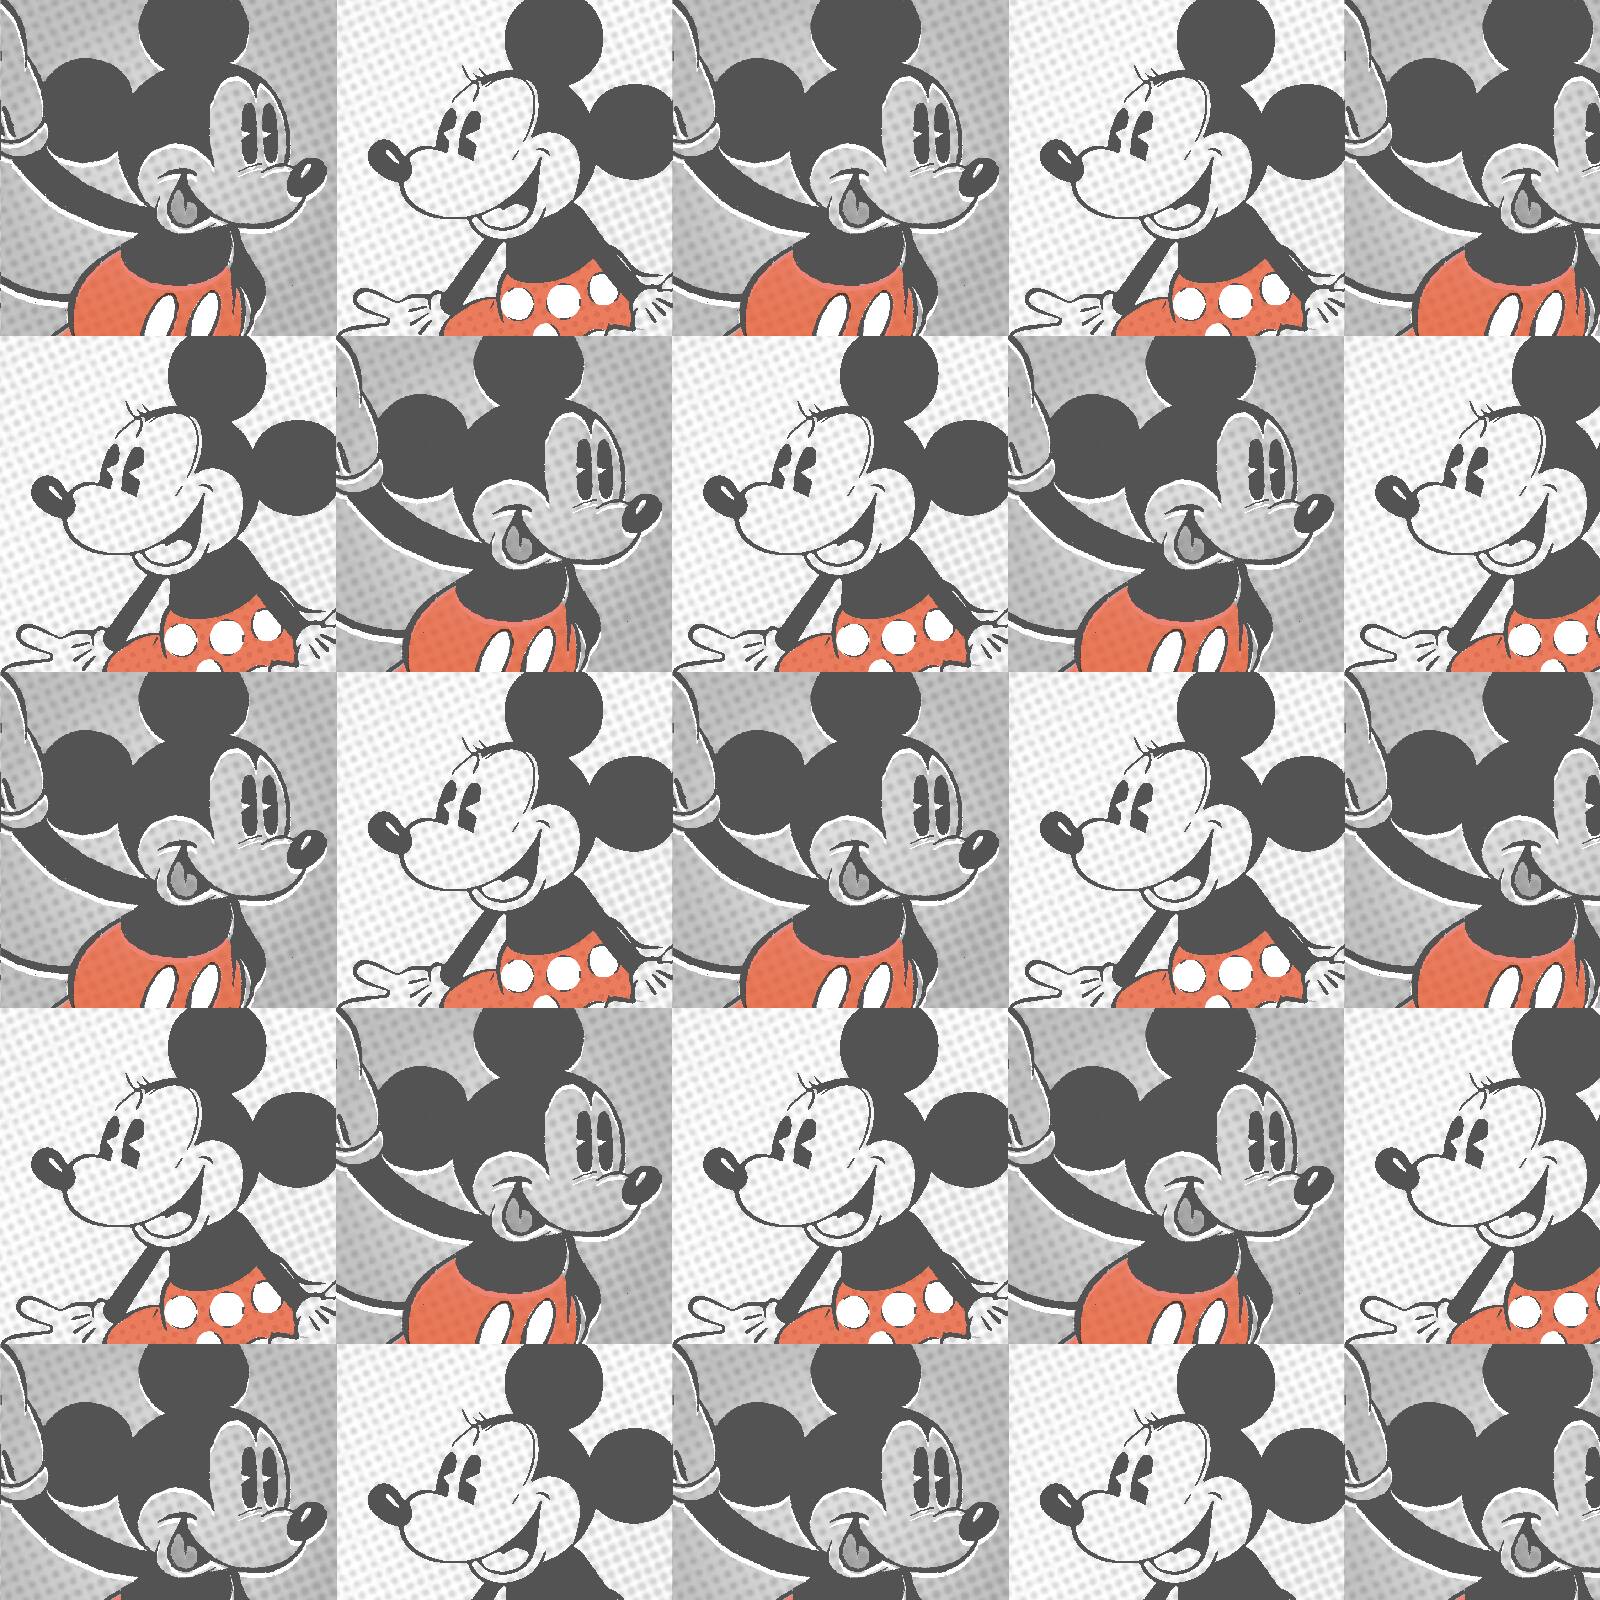 Mickey Mouse Cotton Fabric by the Yard Mickey and Minnie 